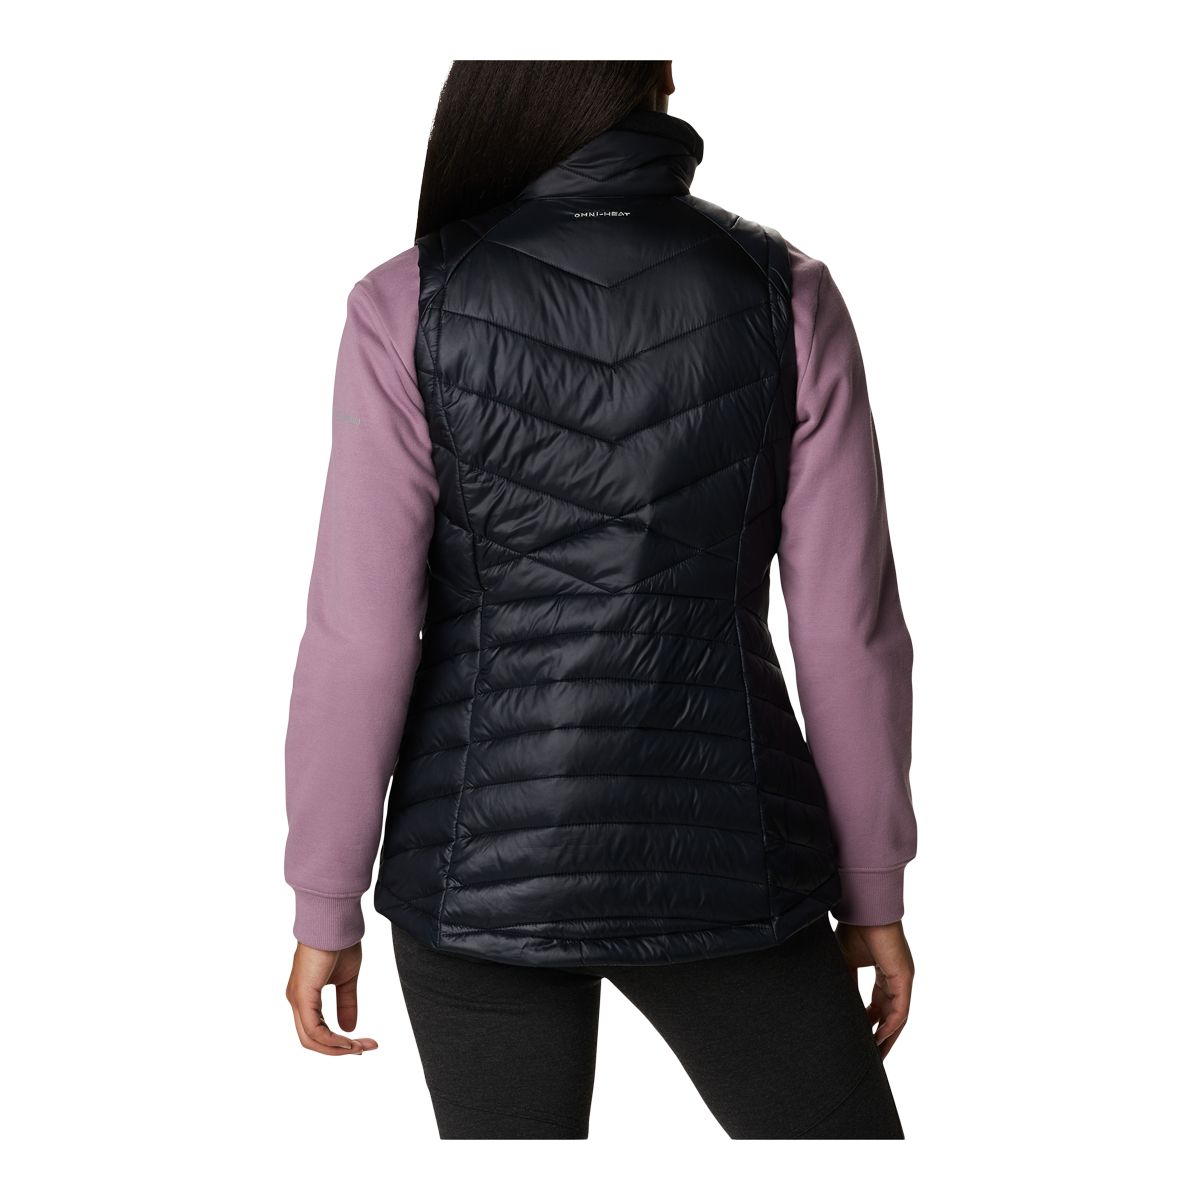 https://media-www.atmosphere.ca/product/div-03-softgoods/dpt-76-outerwear/sdpt-02-womens/333502669/columbia-women-s-joy-peak-oh-black-xs--6cdb61c0-057b-4d5f-b1c0-0f3c8cb2b951-jpgrendition.jpg?imdensity=1&imwidth=1244&impolicy=mZoom